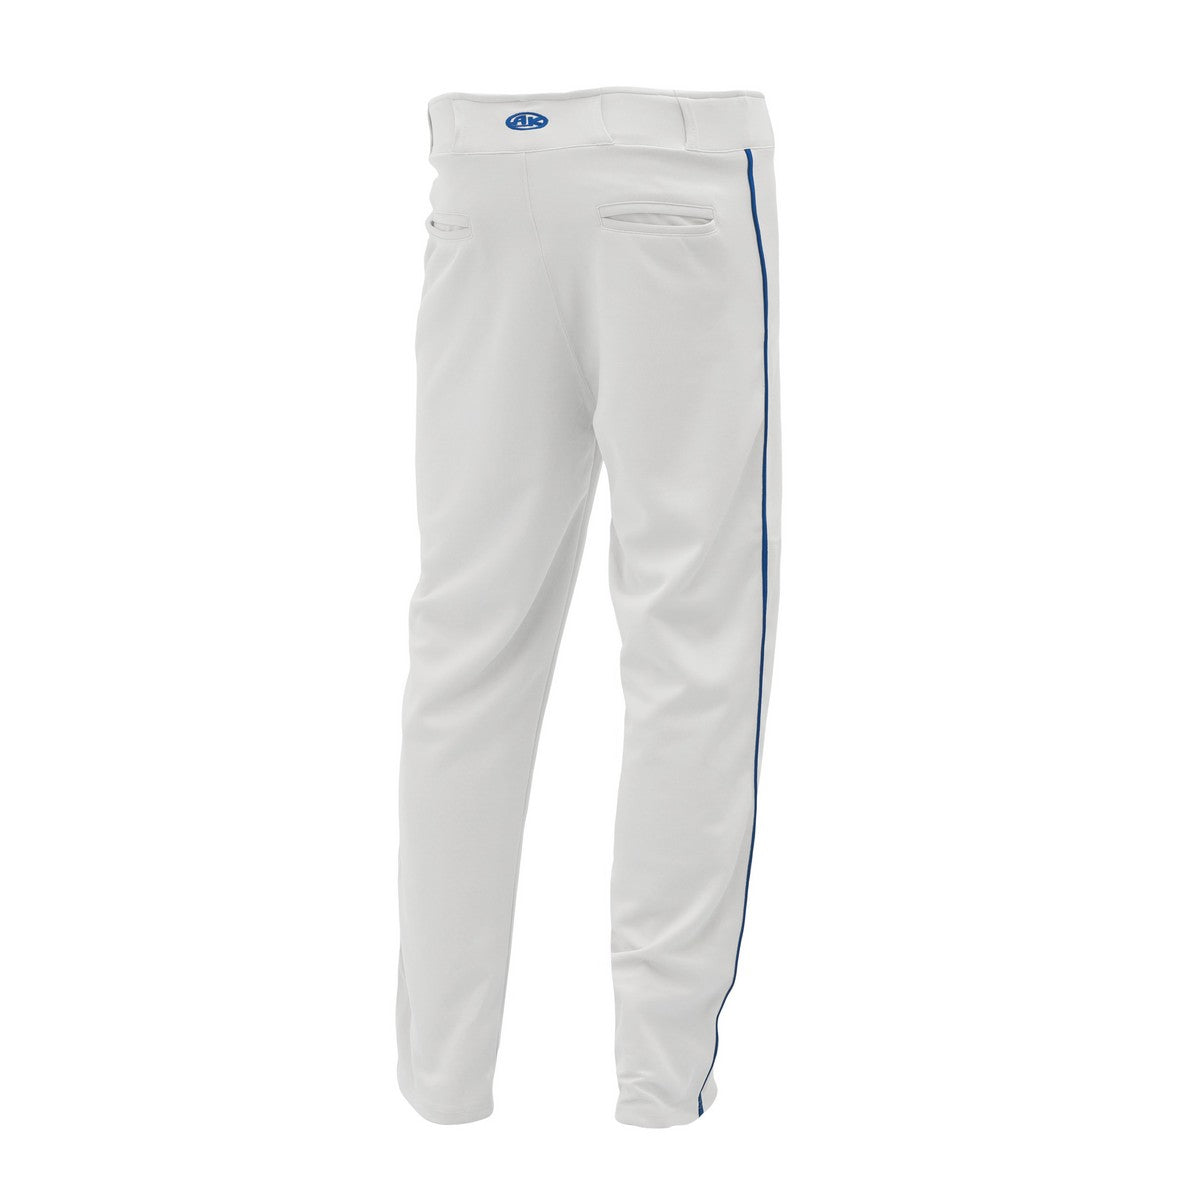 Prostar White and Royal Piped Pant